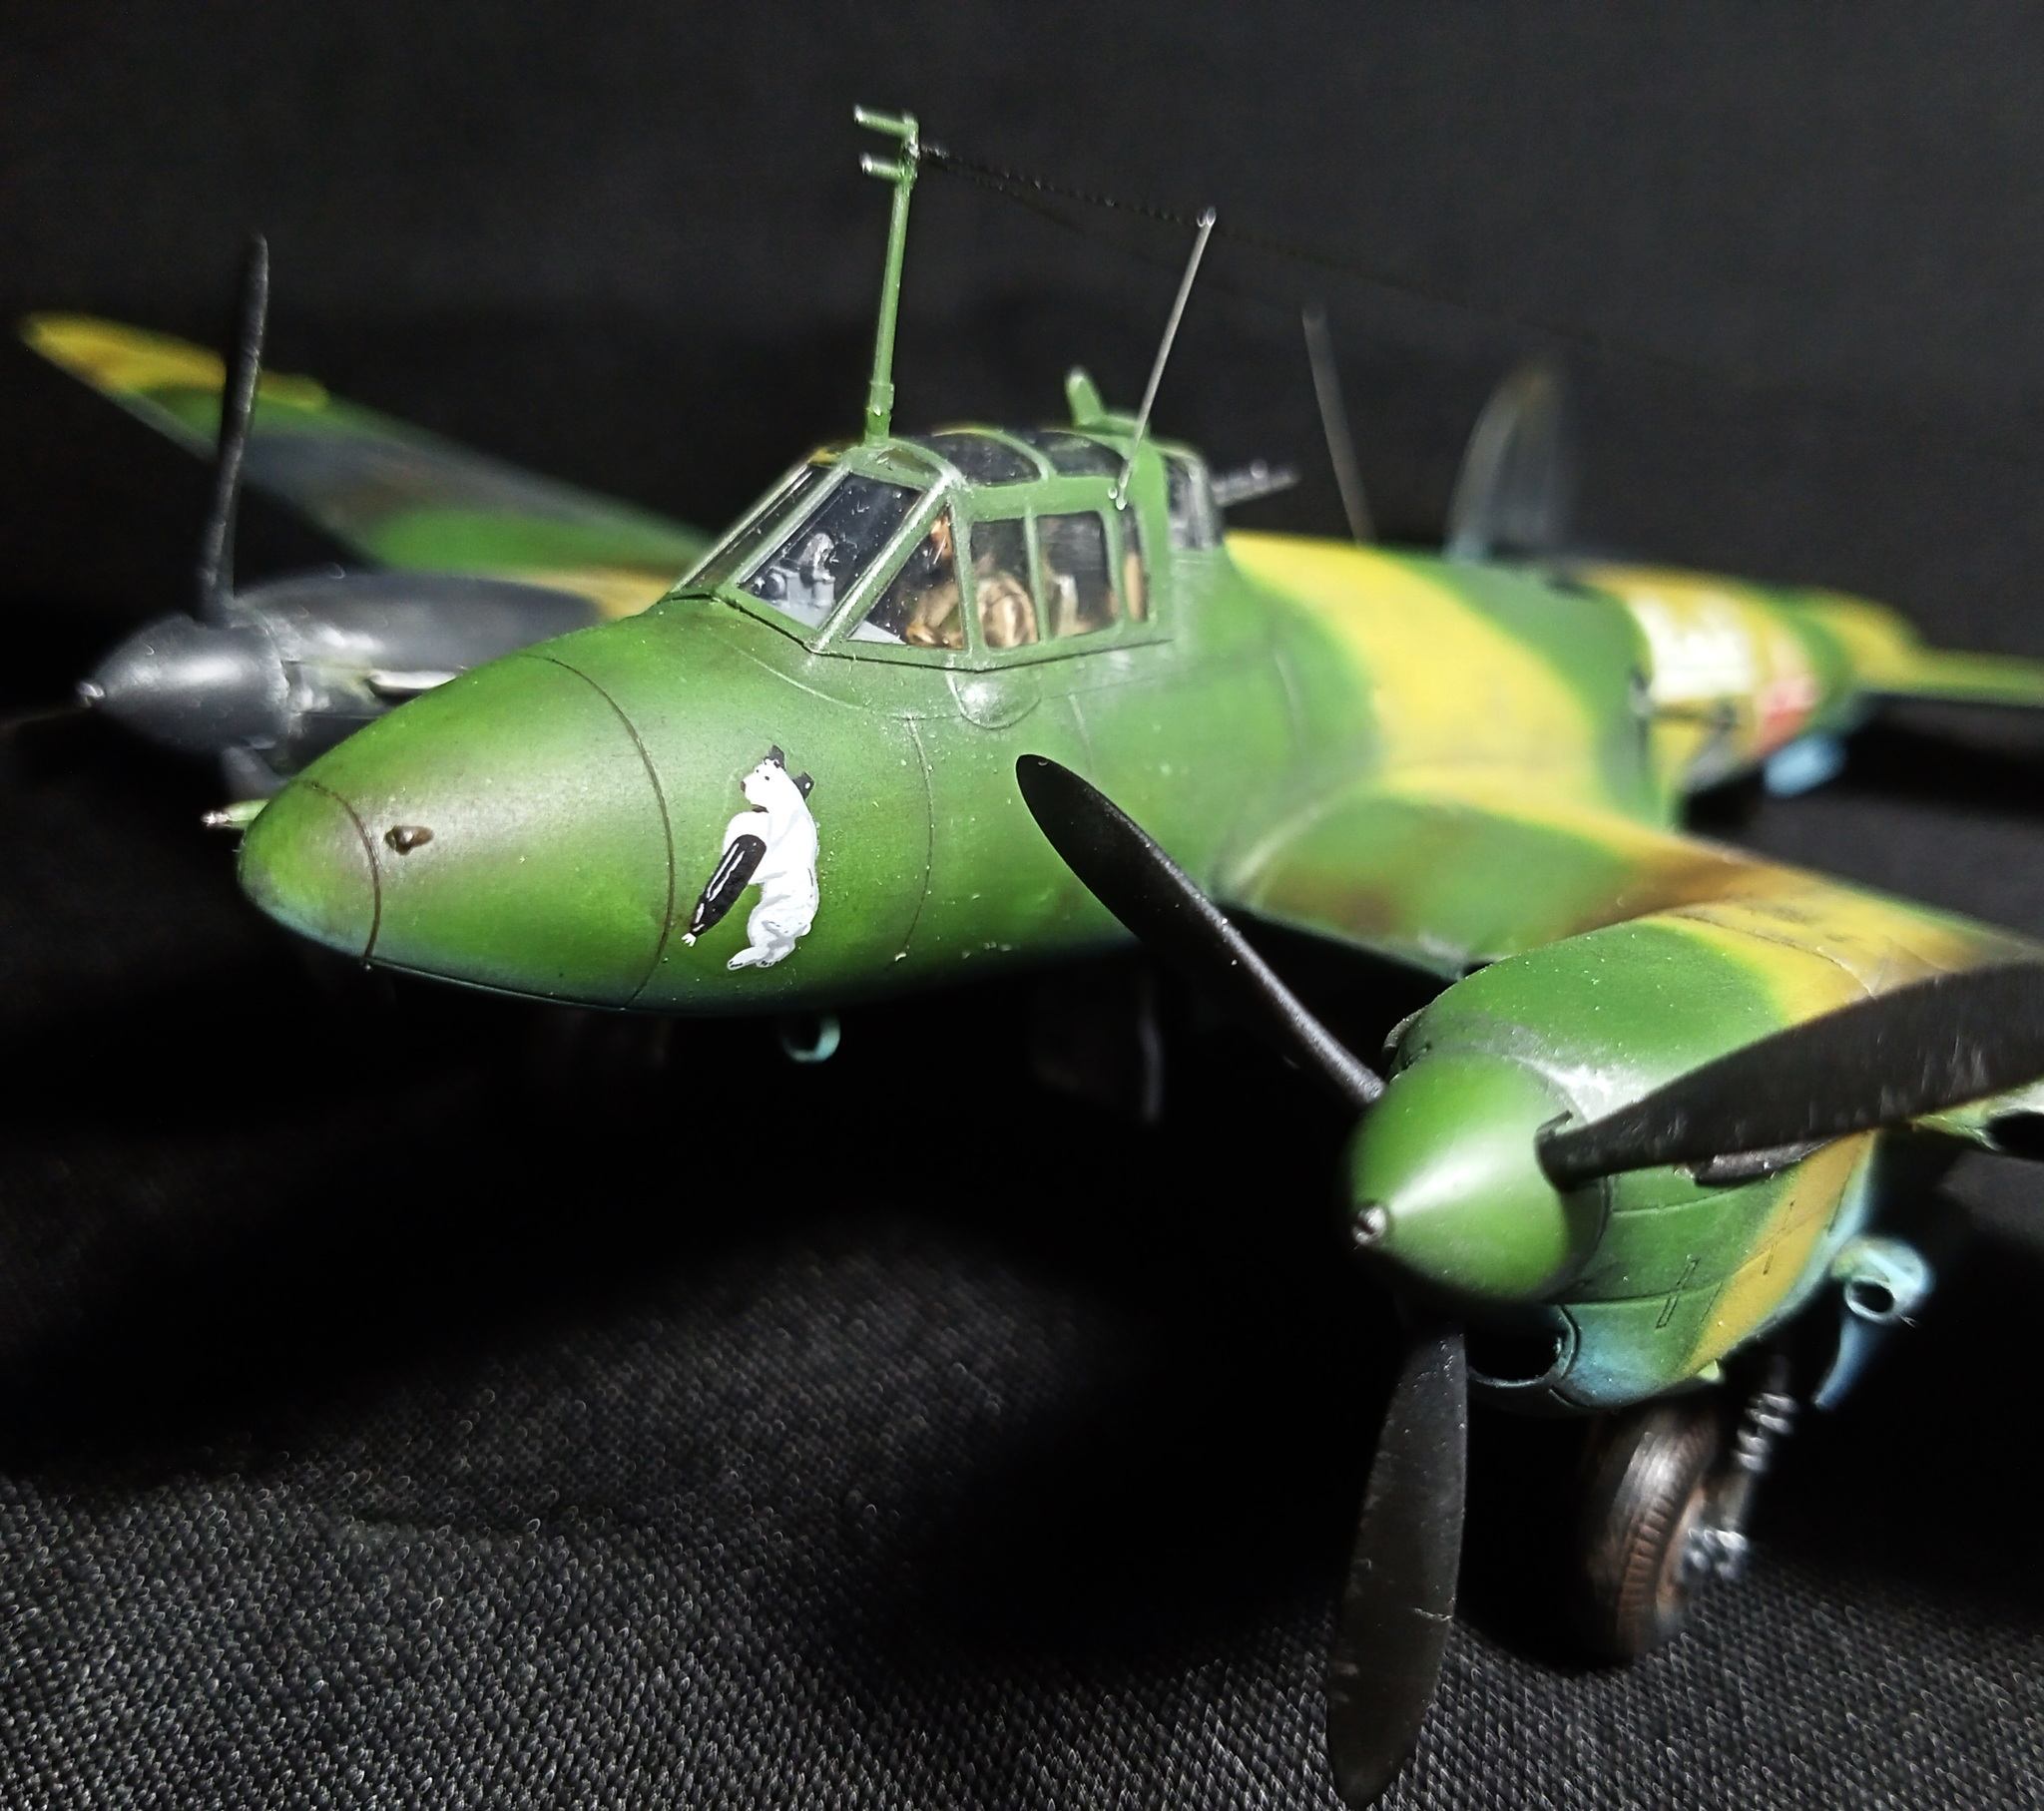 Sometimes a dive bomber. Petlyakov Pe-2 - My, Modeling, Stand modeling, Prefabricated model, Aircraft modeling, Hobby, Miniature, With your own hands, Needlework without process, Aviation, Story, Airplane, The Second World War, Scale model, Collection, Collecting, Bomber, the USSR, Air force, The Great Patriotic War, Video, Longpost, 